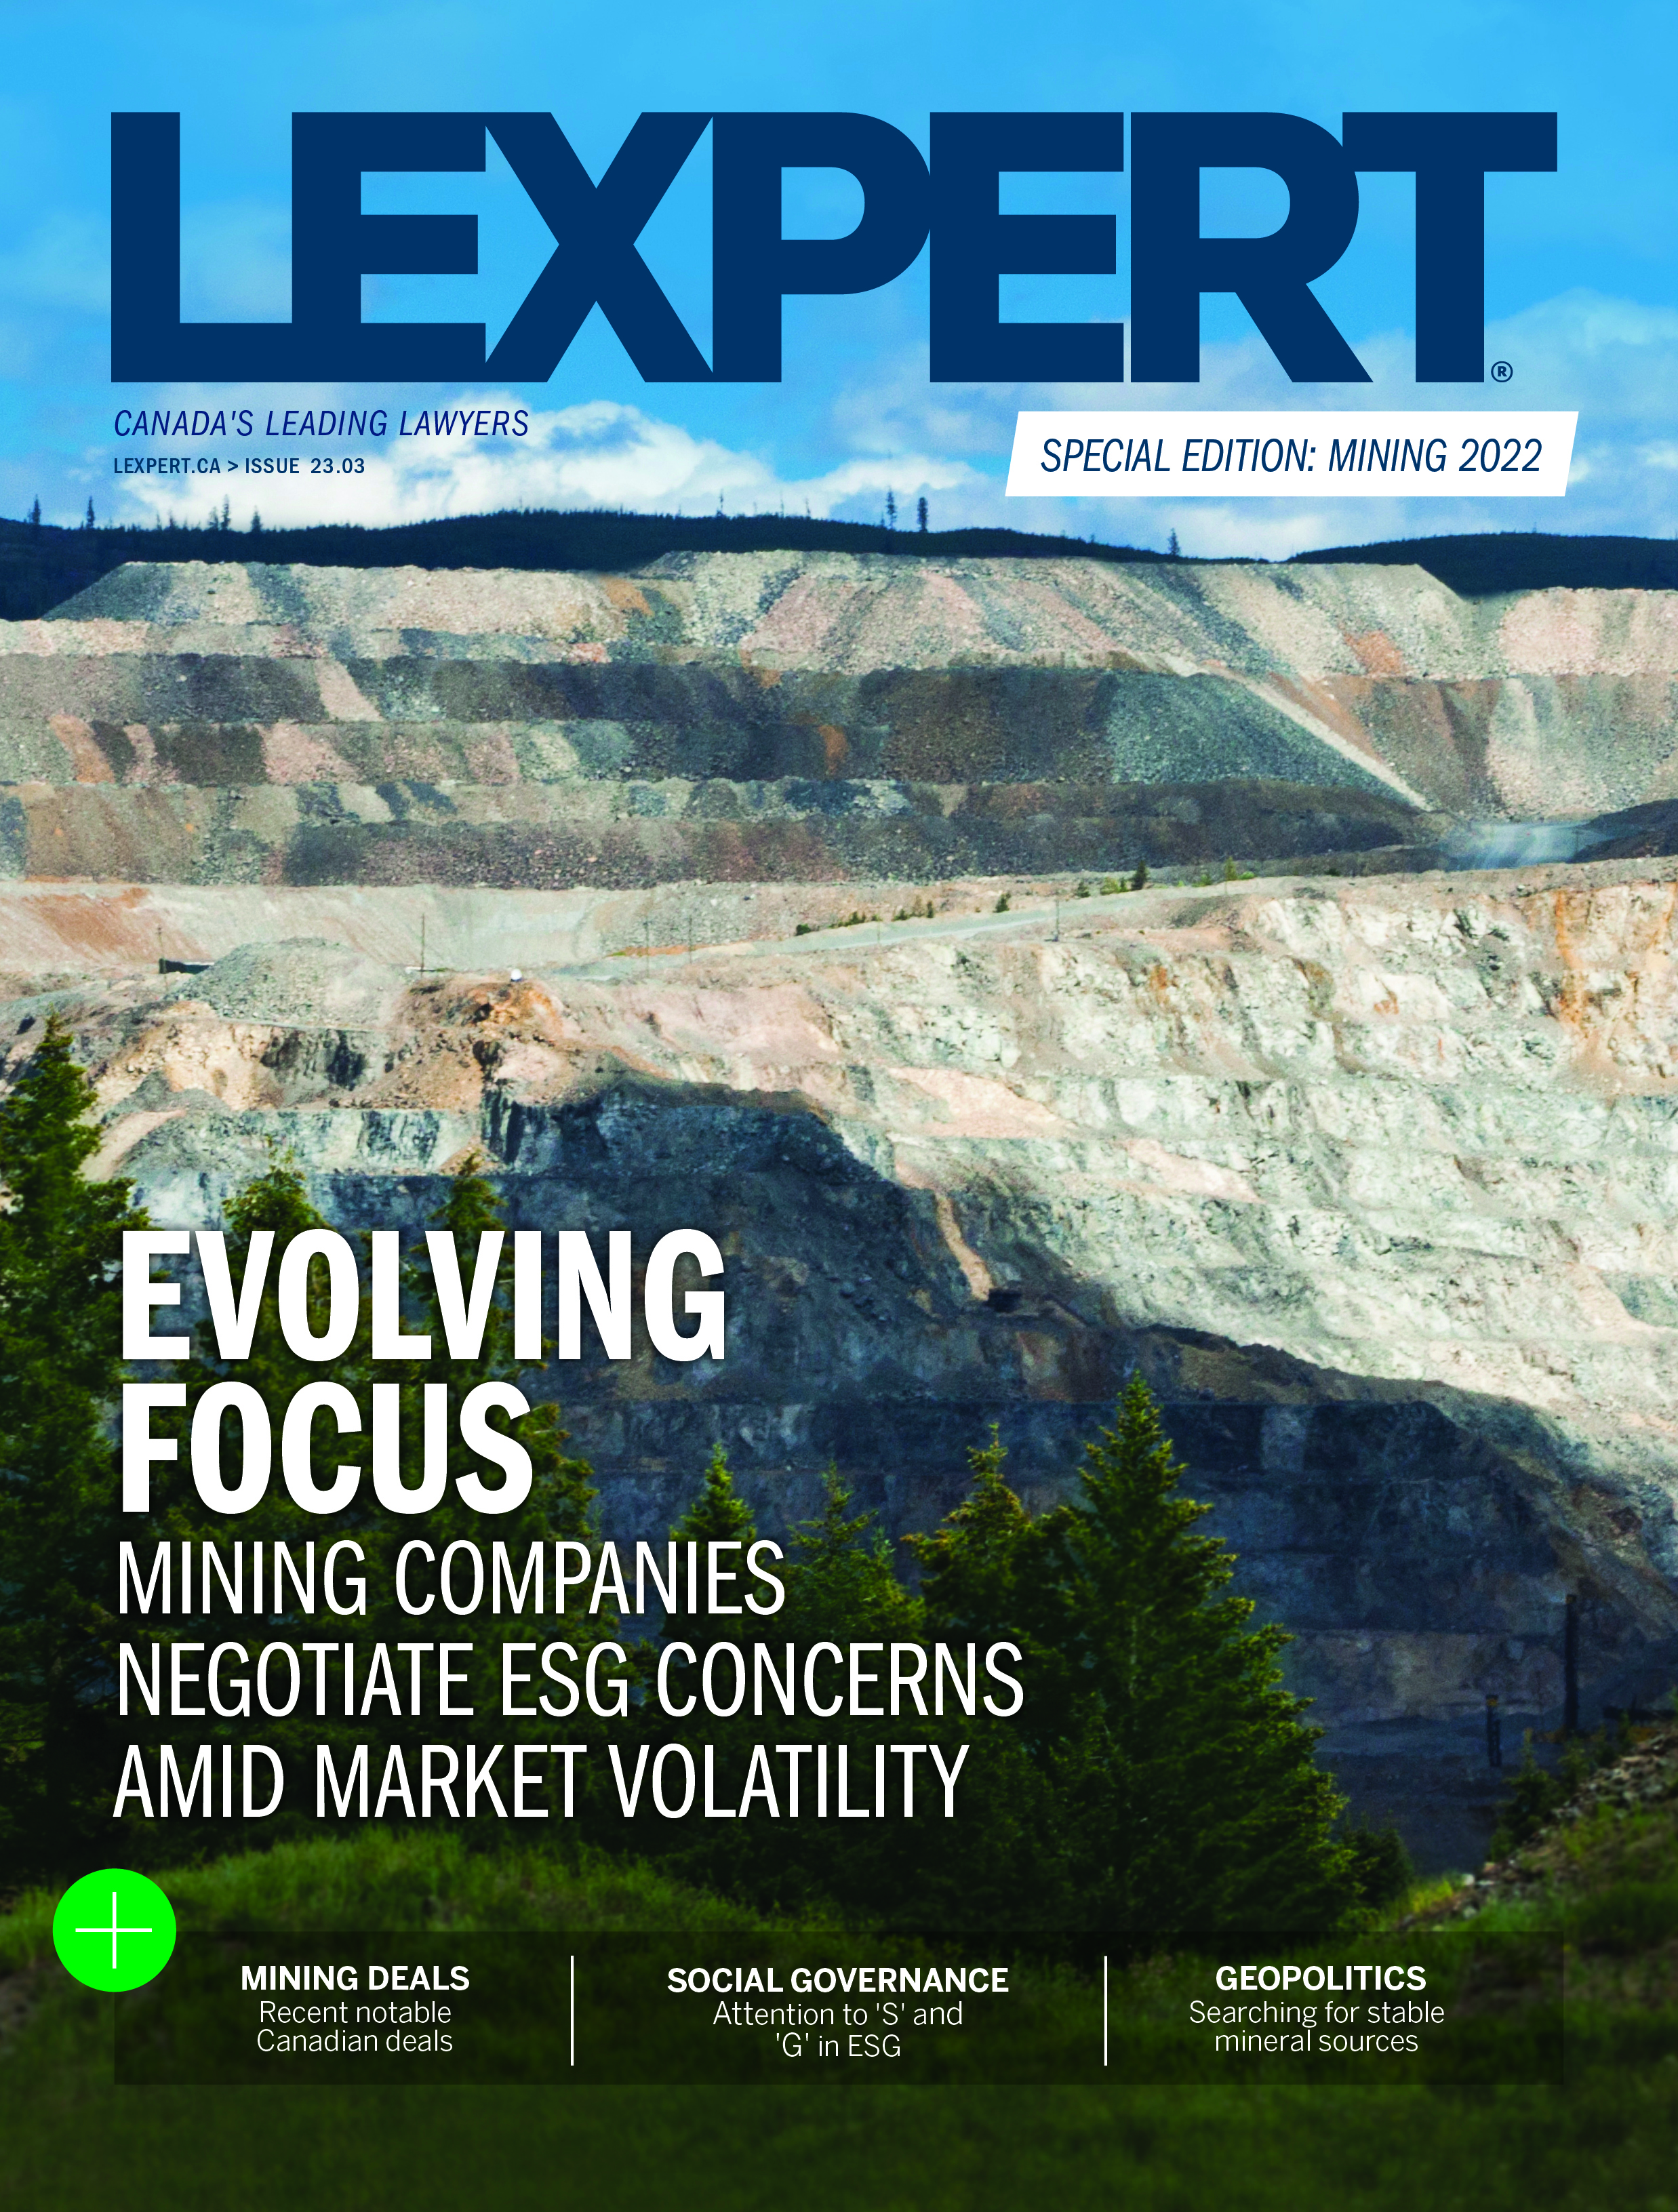 The Lexpert Special Edition: Mining 2022